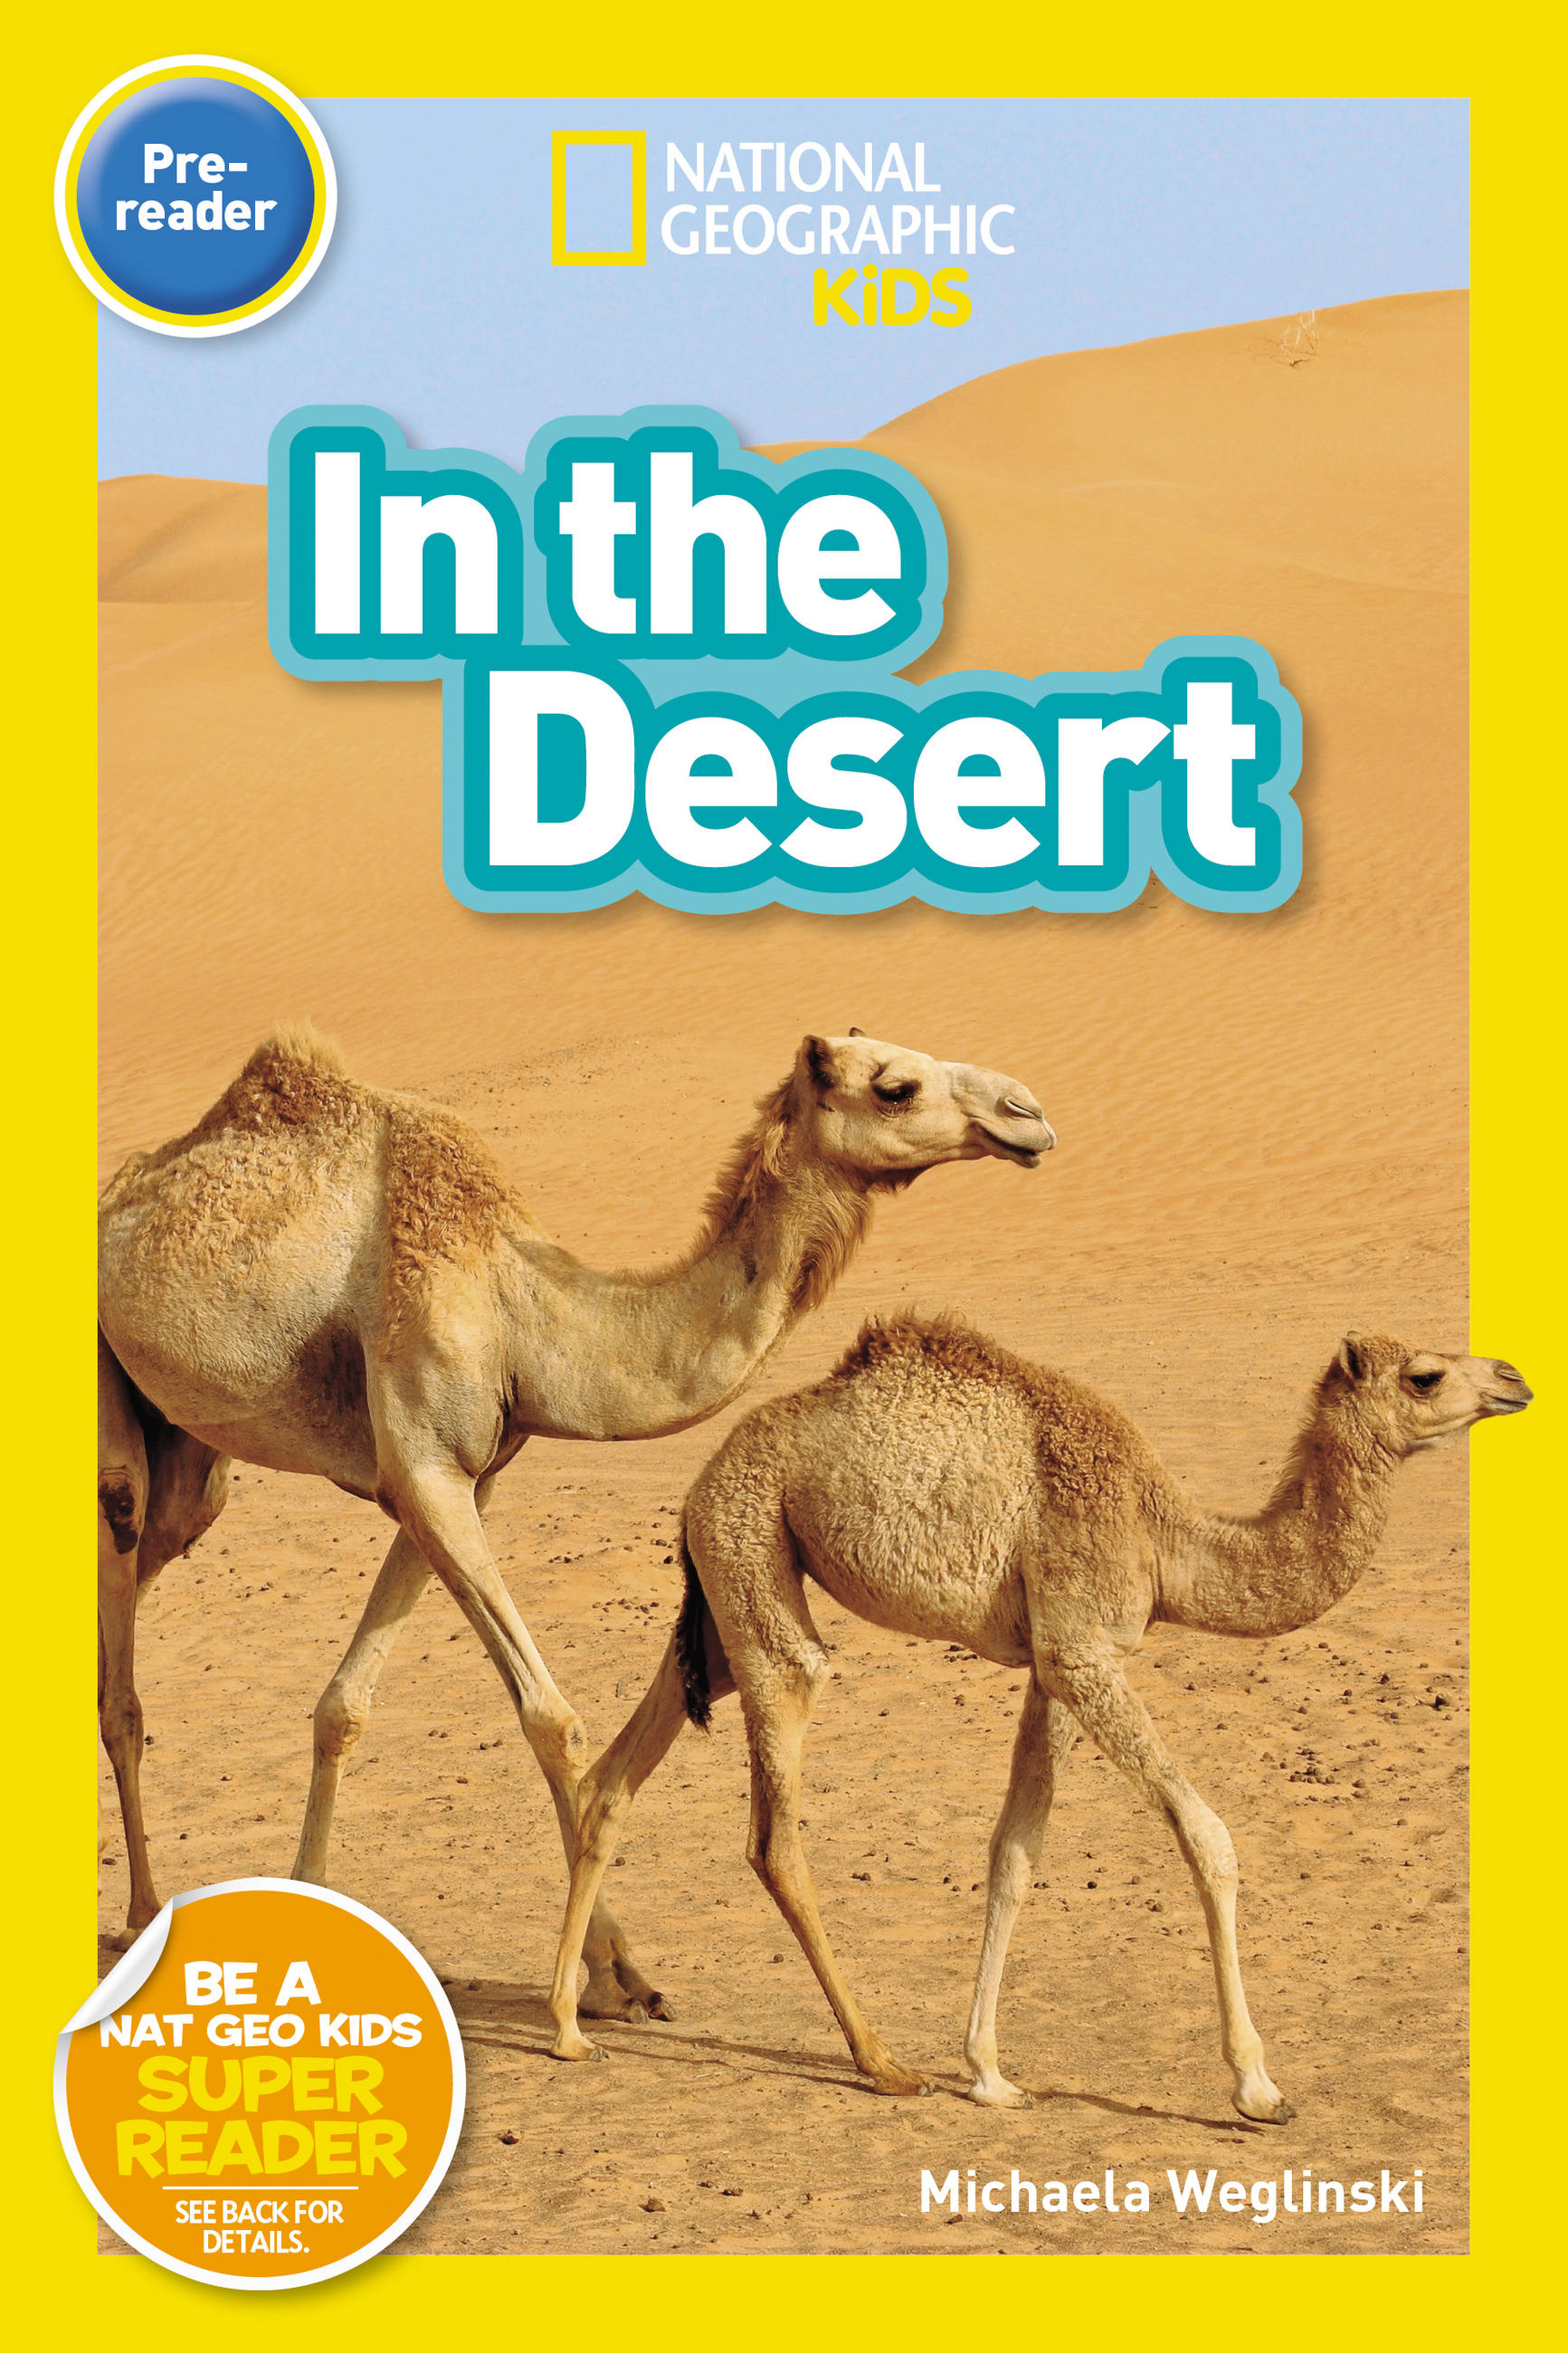 National Geographic Readers: In the Desert (Pre-Reader) | Documentary